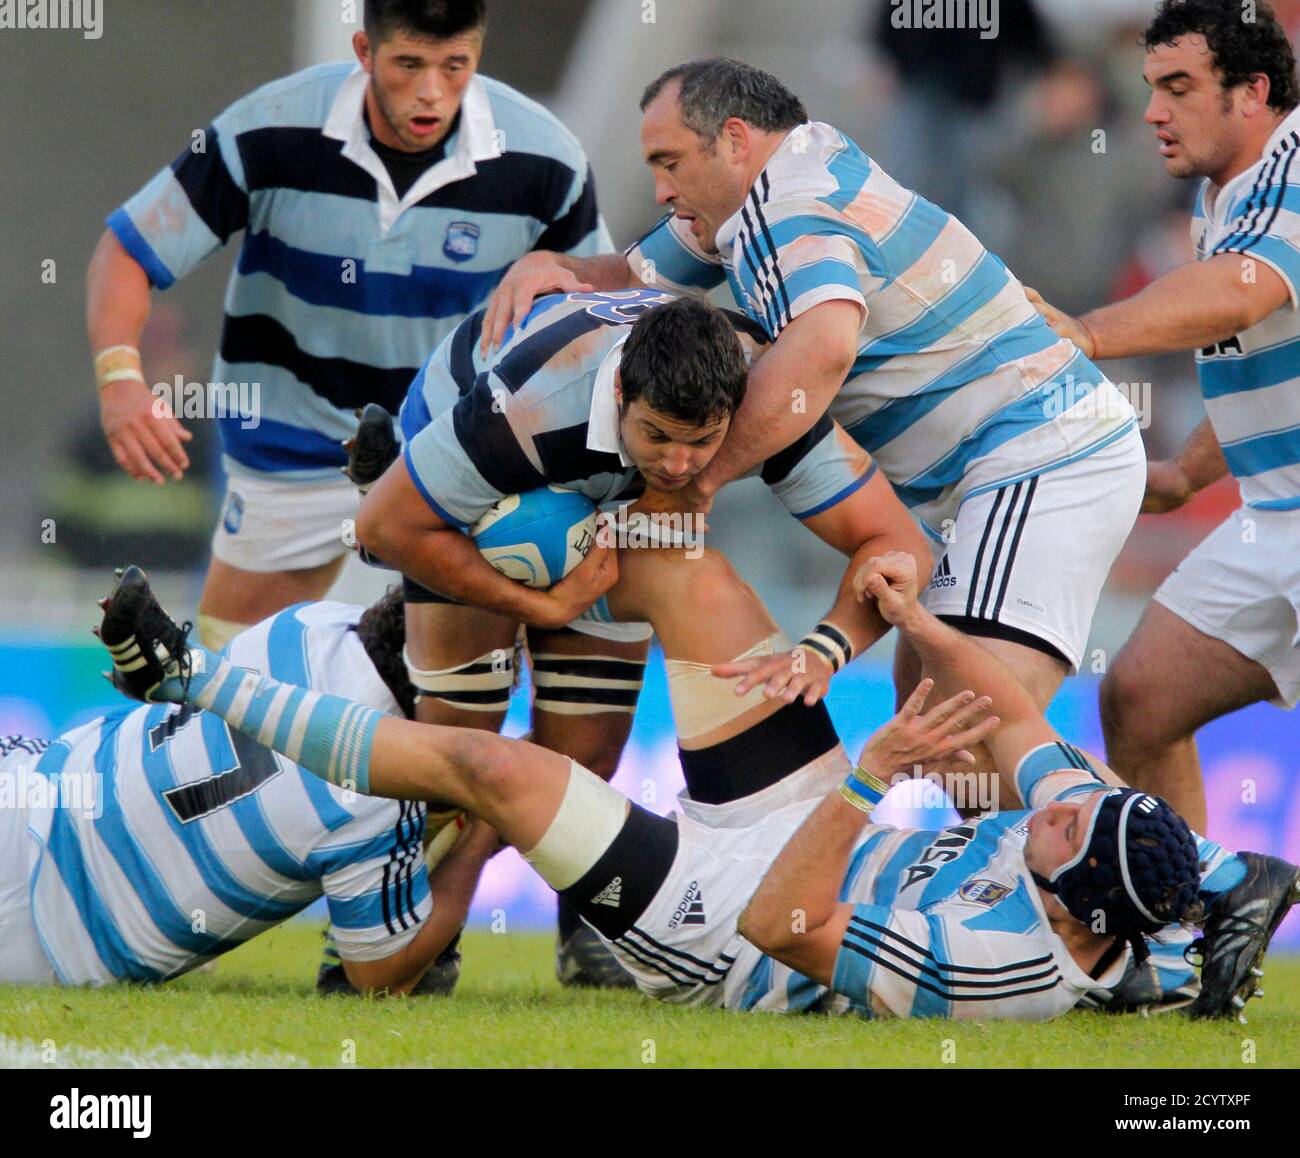 Rodrigo Roncero (2nd R) of Argentina's Los Pumas grabs Damien Chouly (C) of  France's Barbarians during their friendly rugby match in Buenos Aires June  4, 2011. REUTERS/Enrique Marcarian(ARGENTINA - Tags: SPORT RUGBY